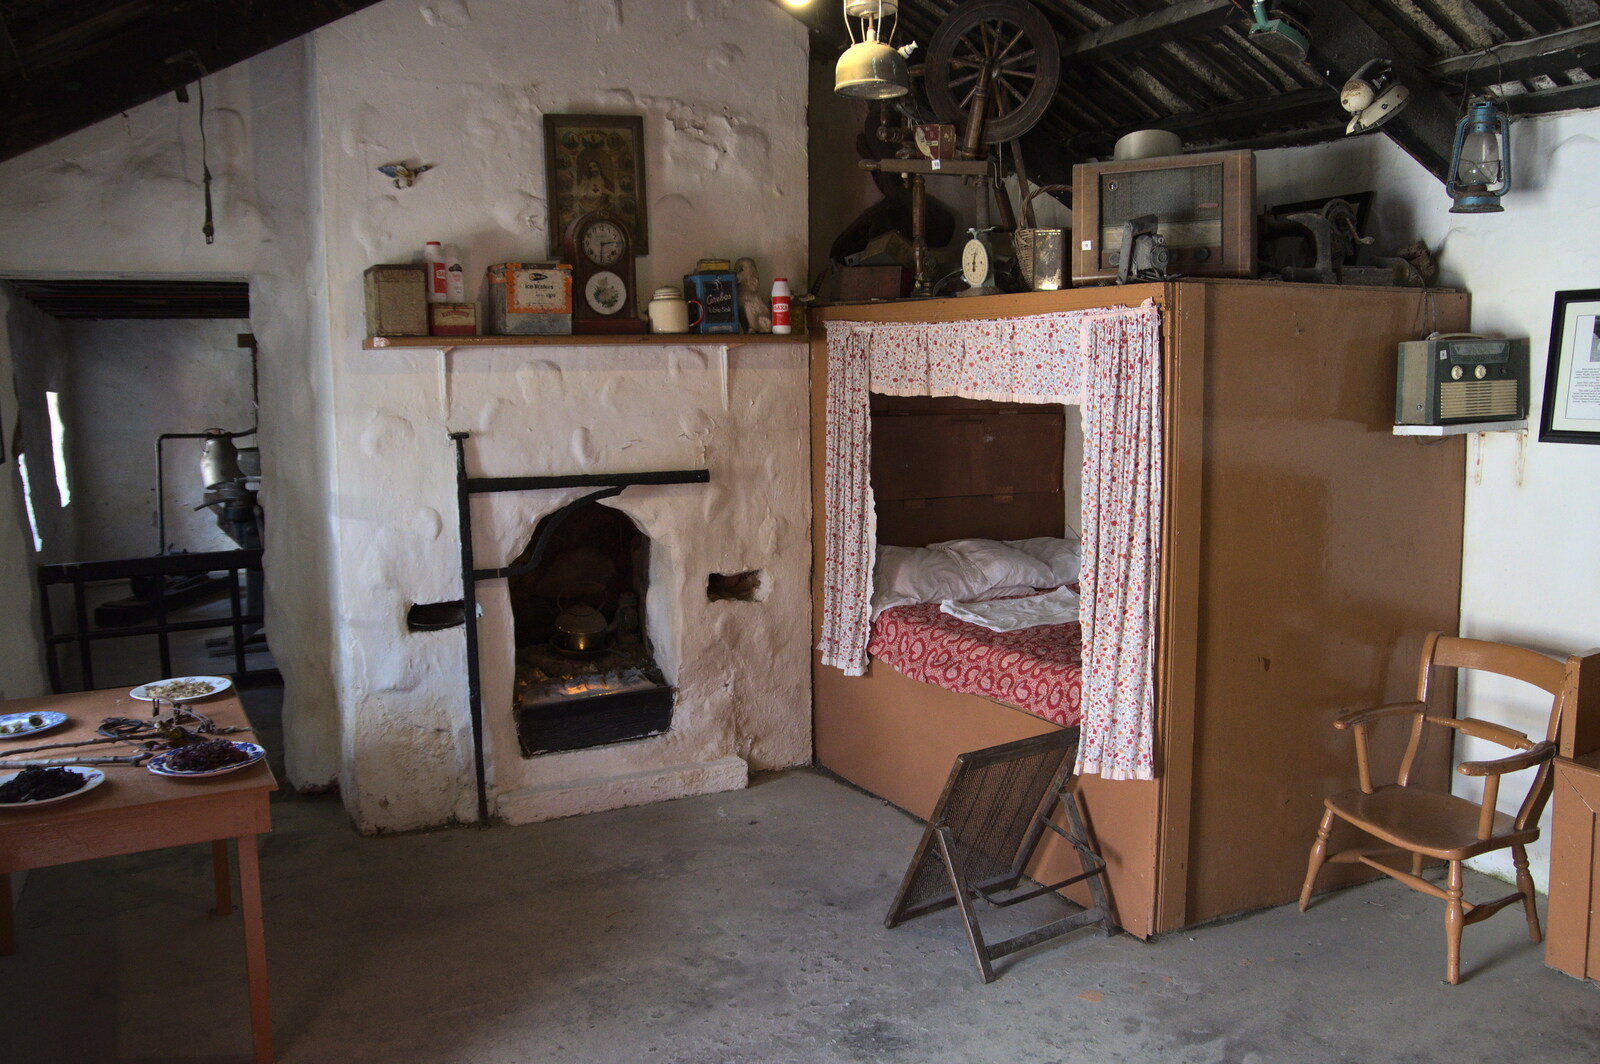 Greencastle, Doagh and Malin Head, County Donegal, Ireland - 19th April 2022: A kitchen bed 